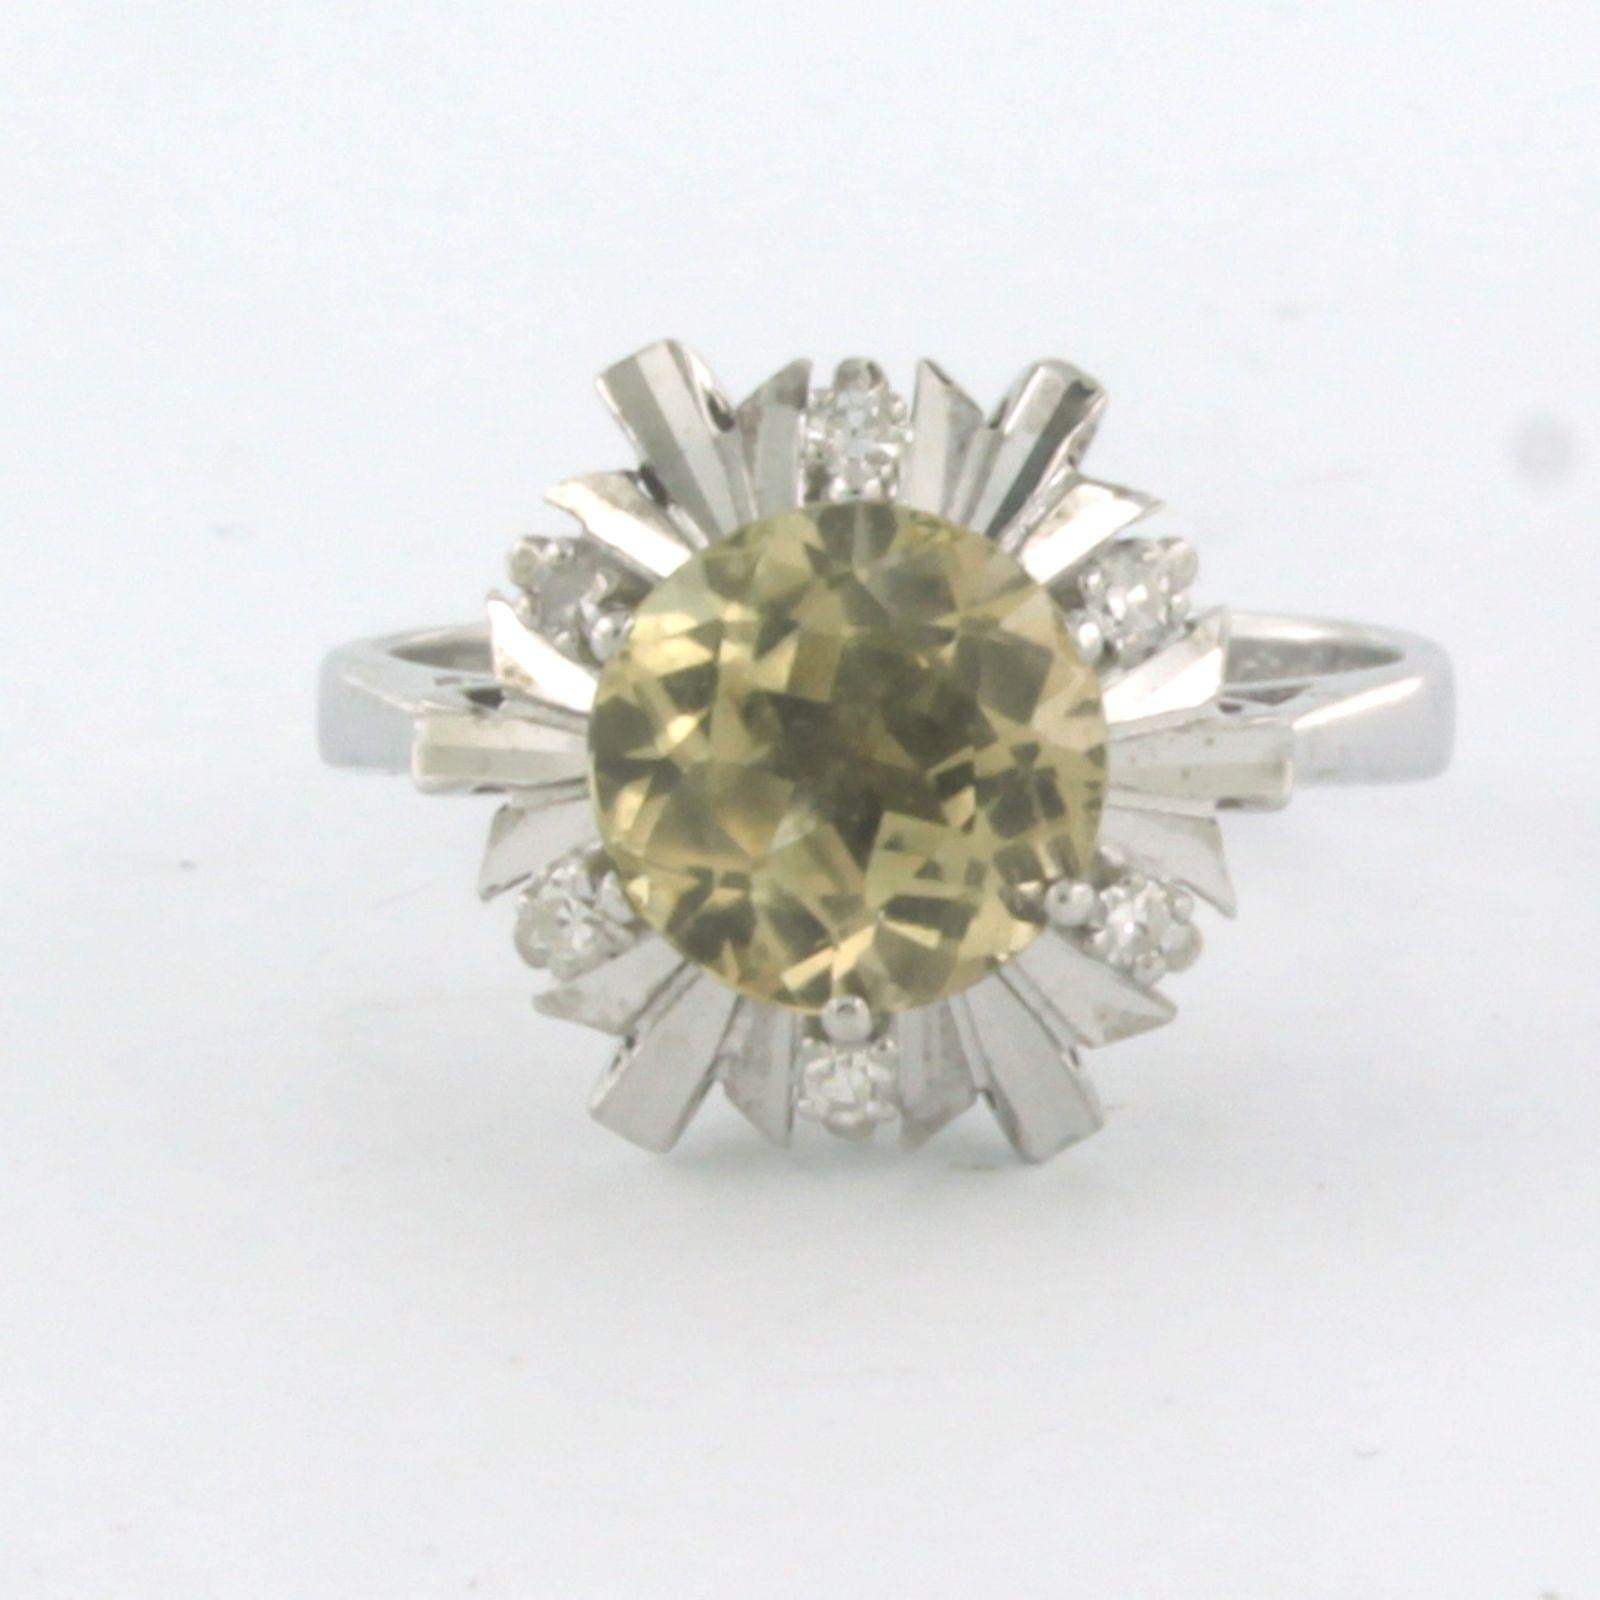 18k white gold ring with a citrine in the center. 2.33ct and entourage single cut diamonds up to. 0.09ct - F/G - VS/SI - ring size U.S. 8 - EU. 18.25(57)

detailed description

the top of the ring has a diameter of 1.3 cm wide by 9.3 mm high

ring